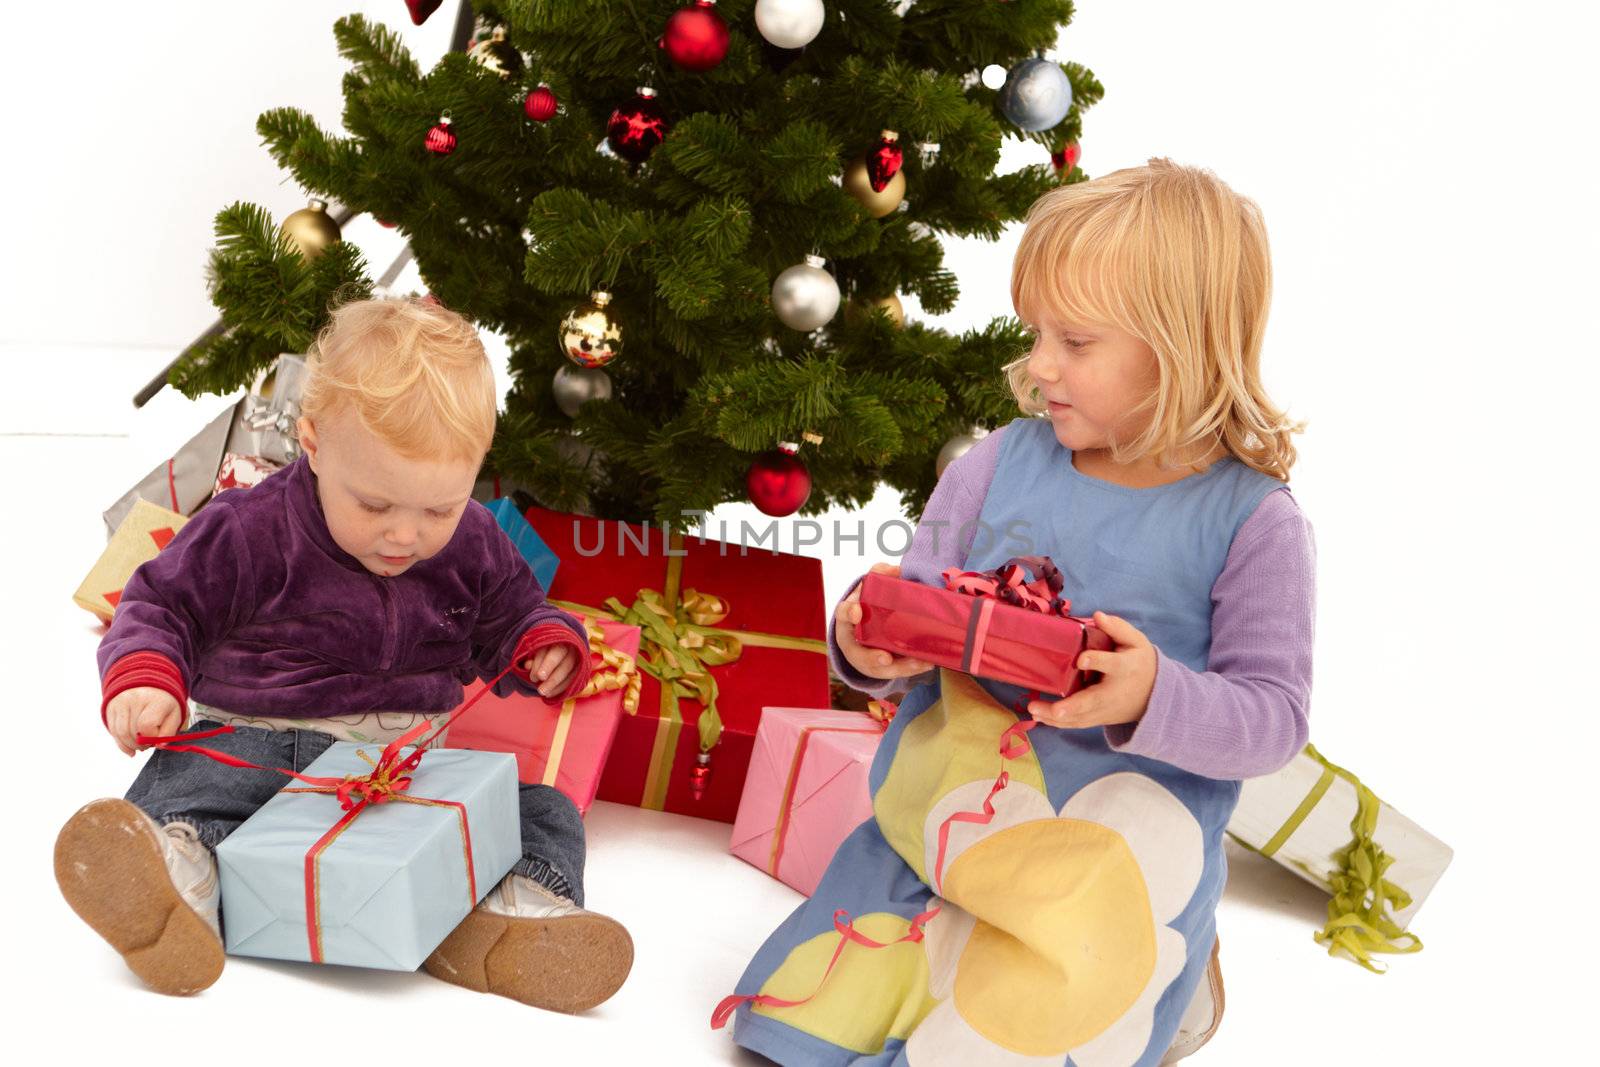 Christmas - Kids opening presents under tree by FreedomImage